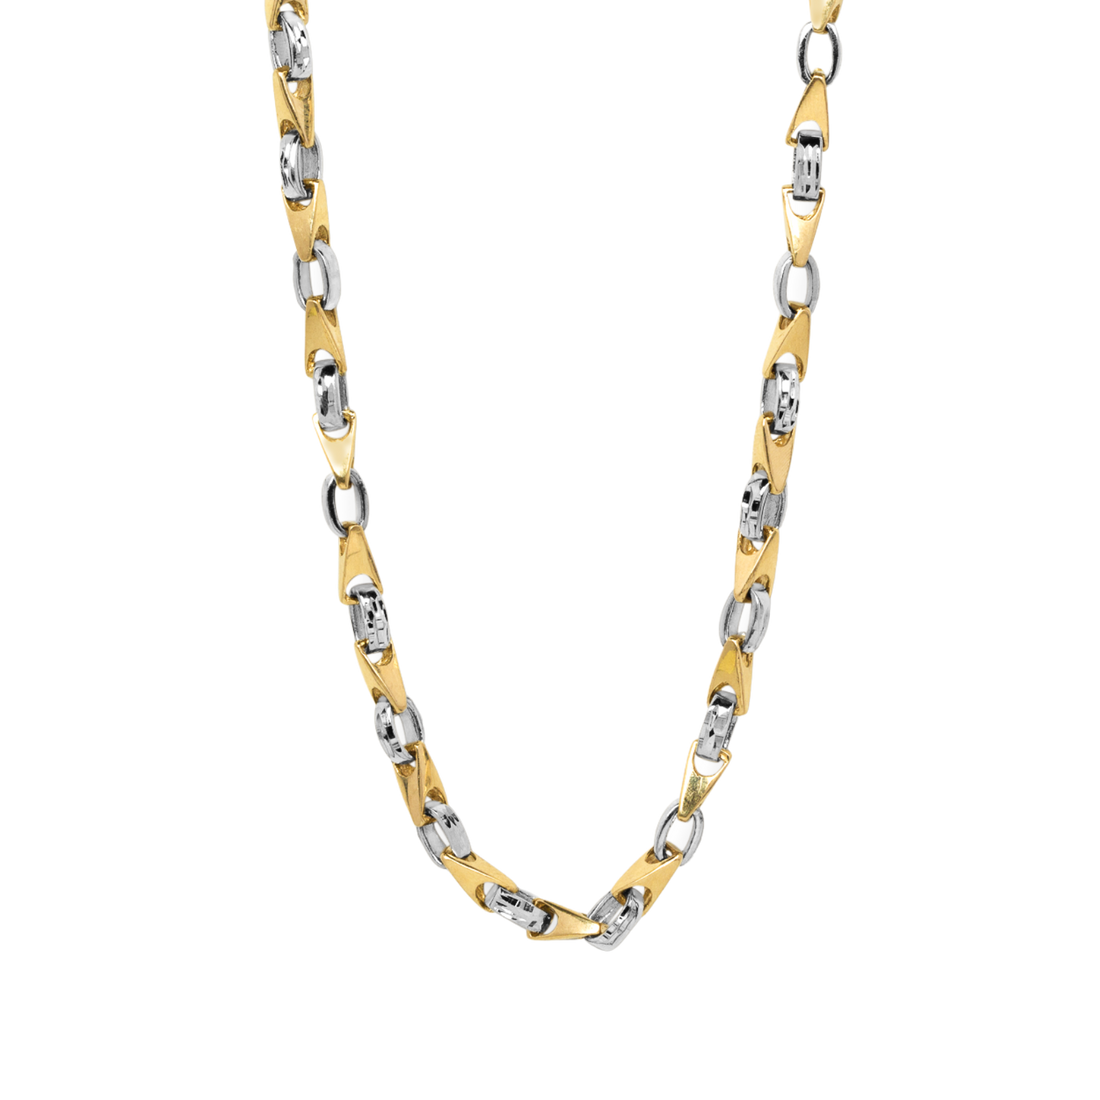 mens solid gold fancy chain toronto, white gold chain mens, fancy gold chain necklace, gold chains toronto ontario, rose gold curb chain toronto